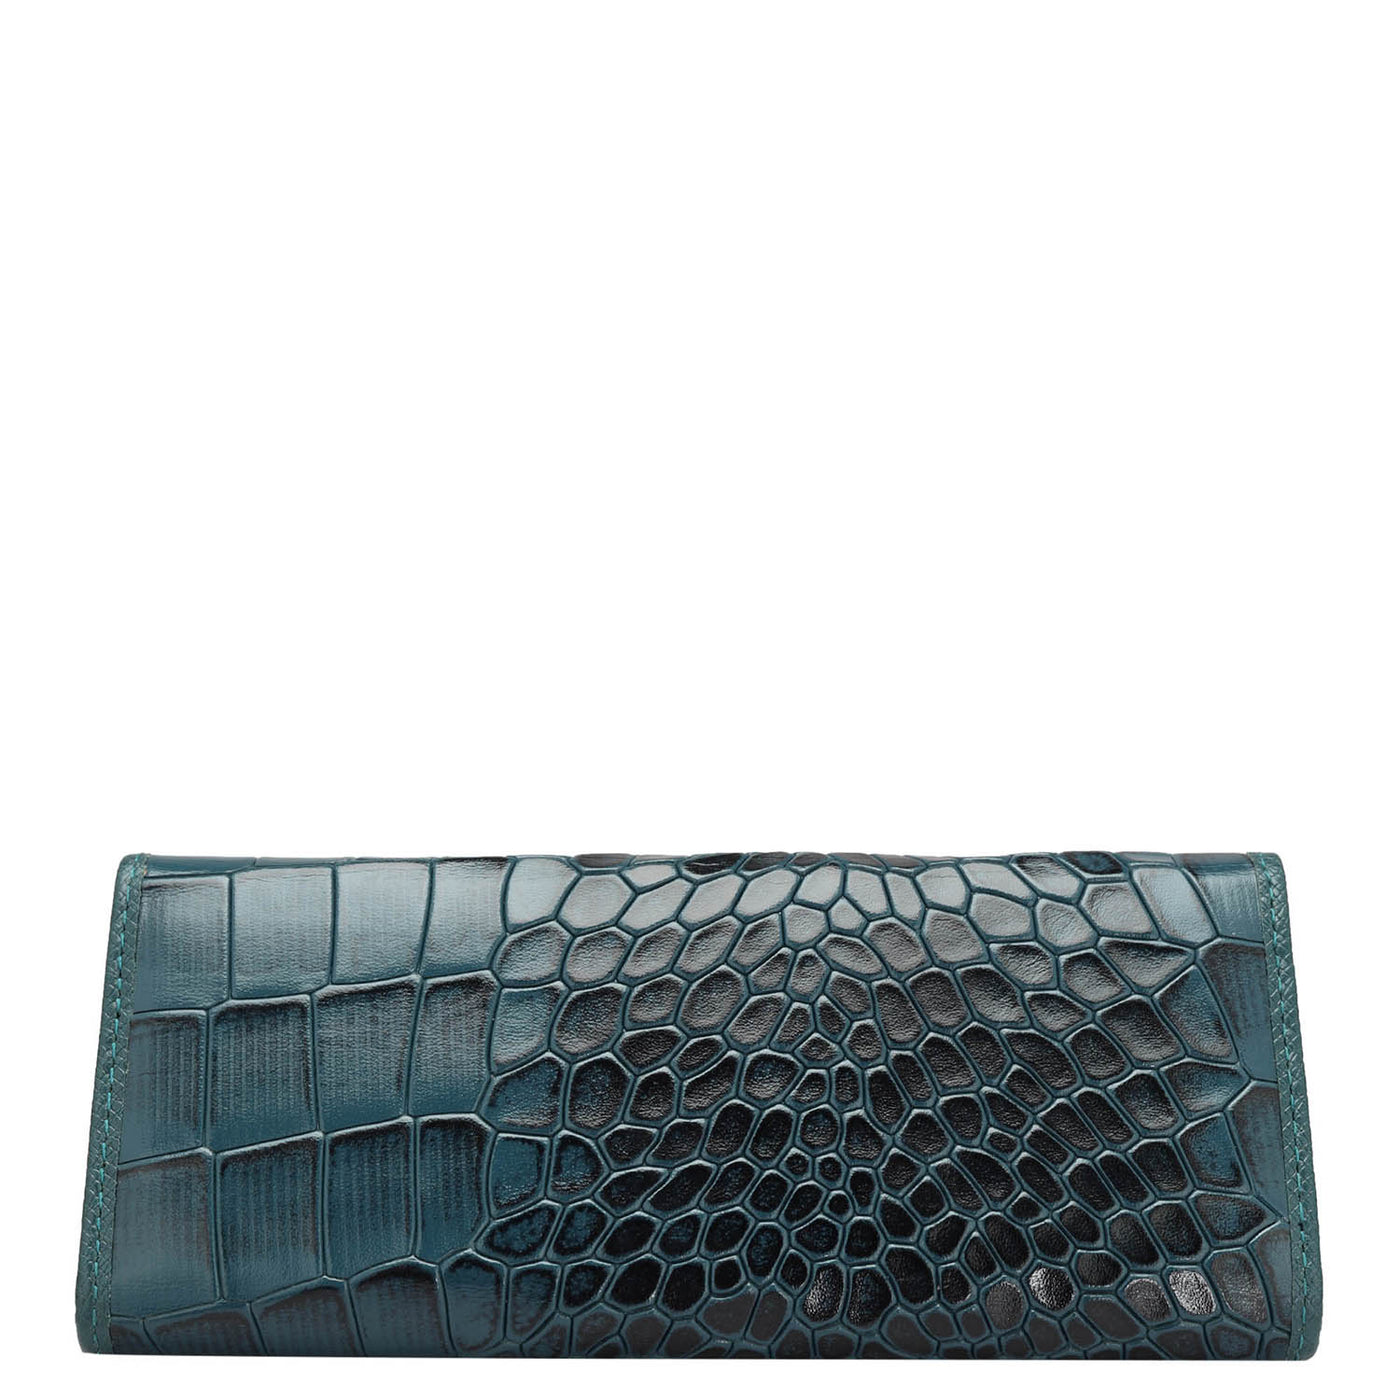 Croco Leather Spectacle Case - Ocean